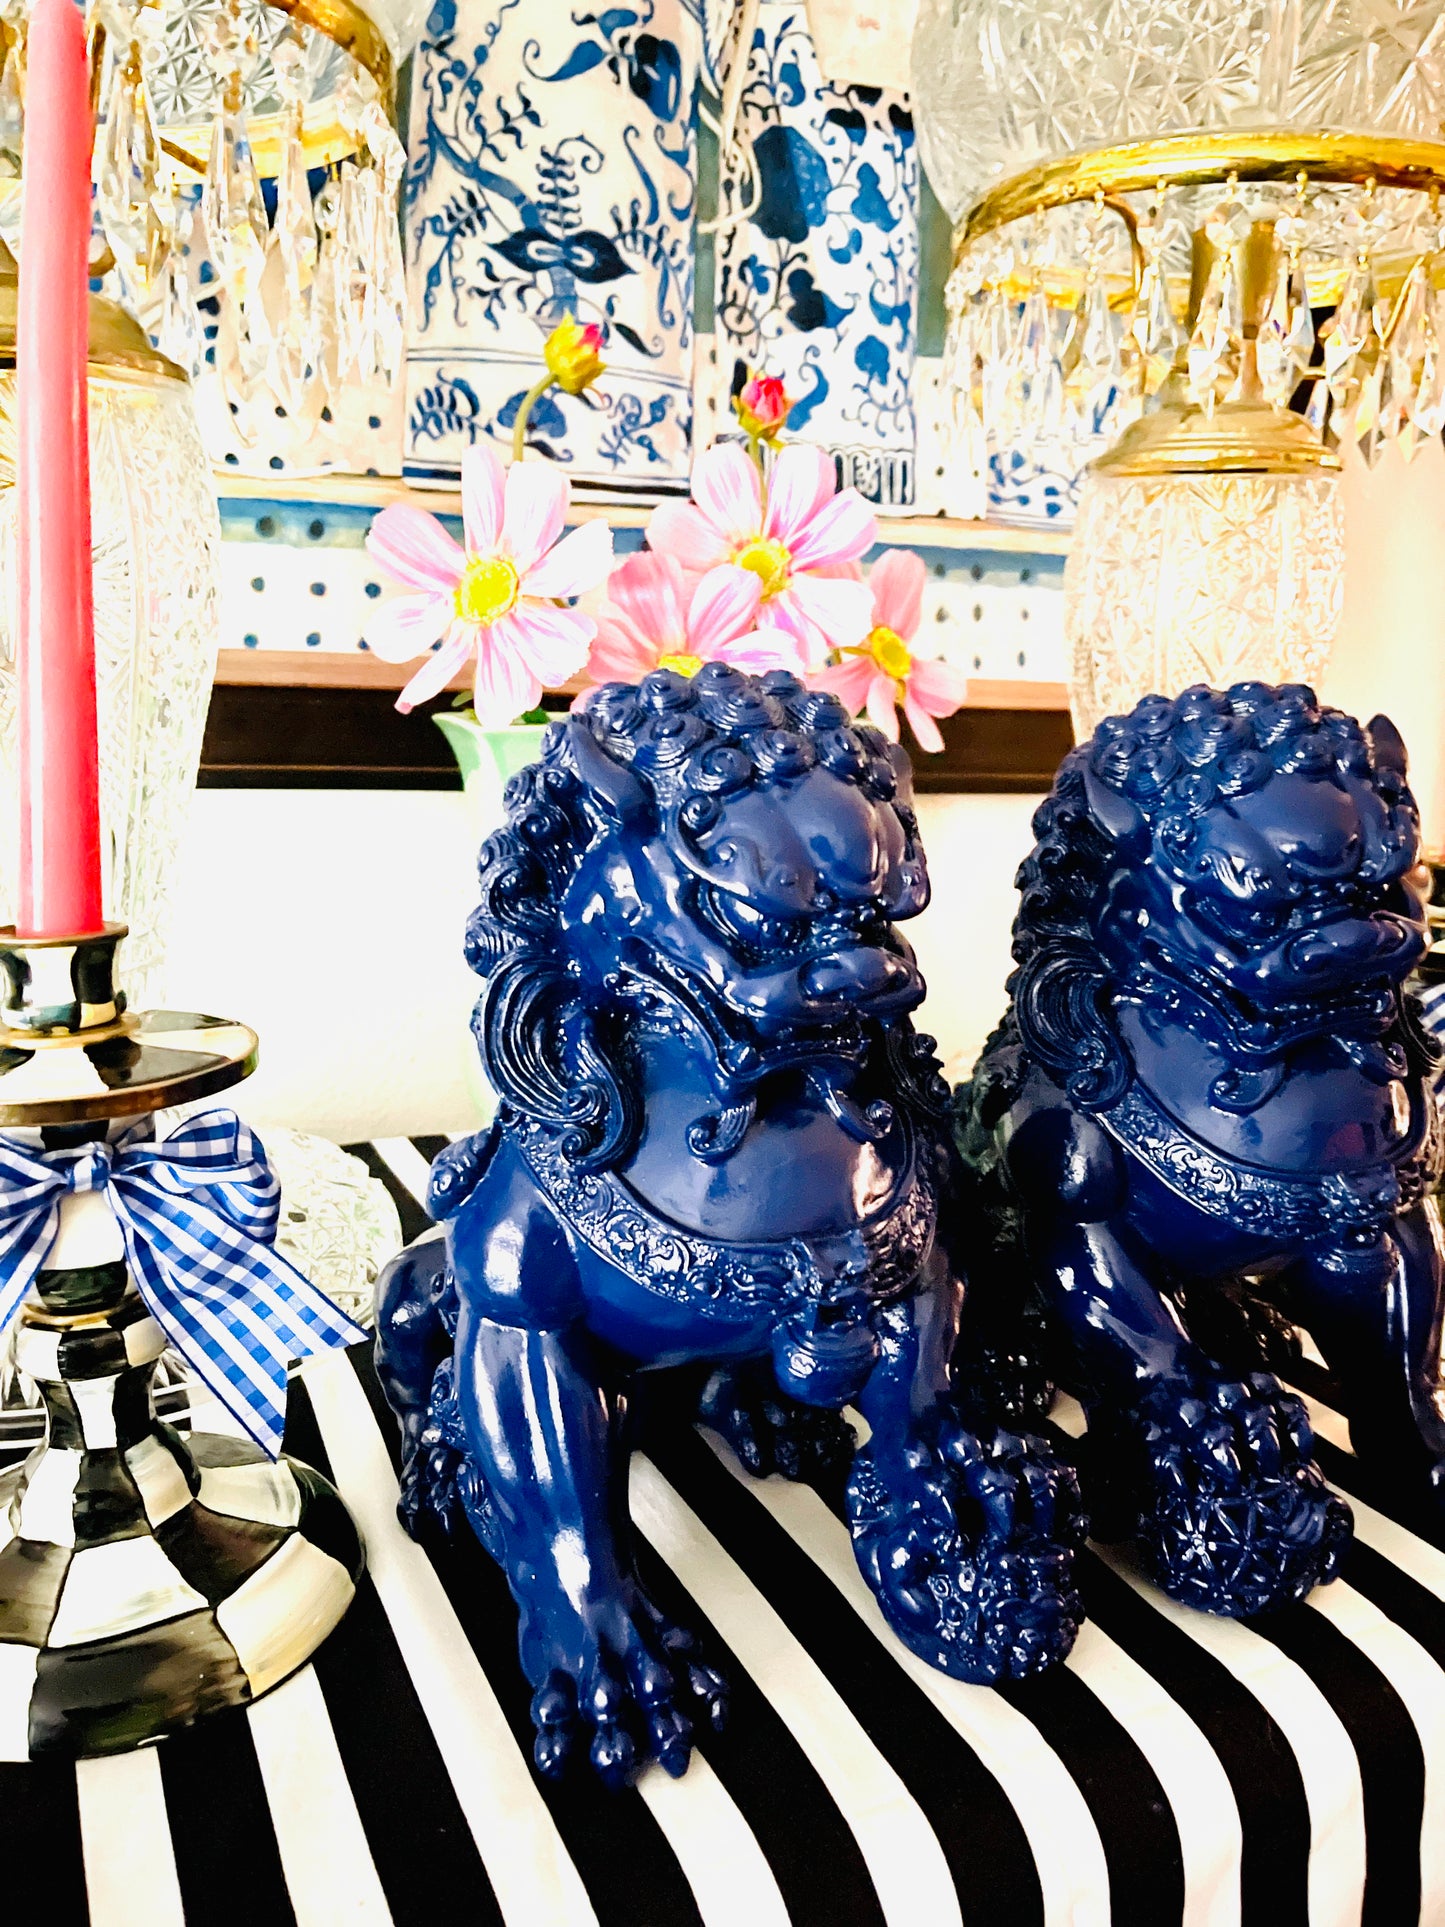 Pair of Blue Lacquered Foo Dogs, Chinoiserie Chic Decor